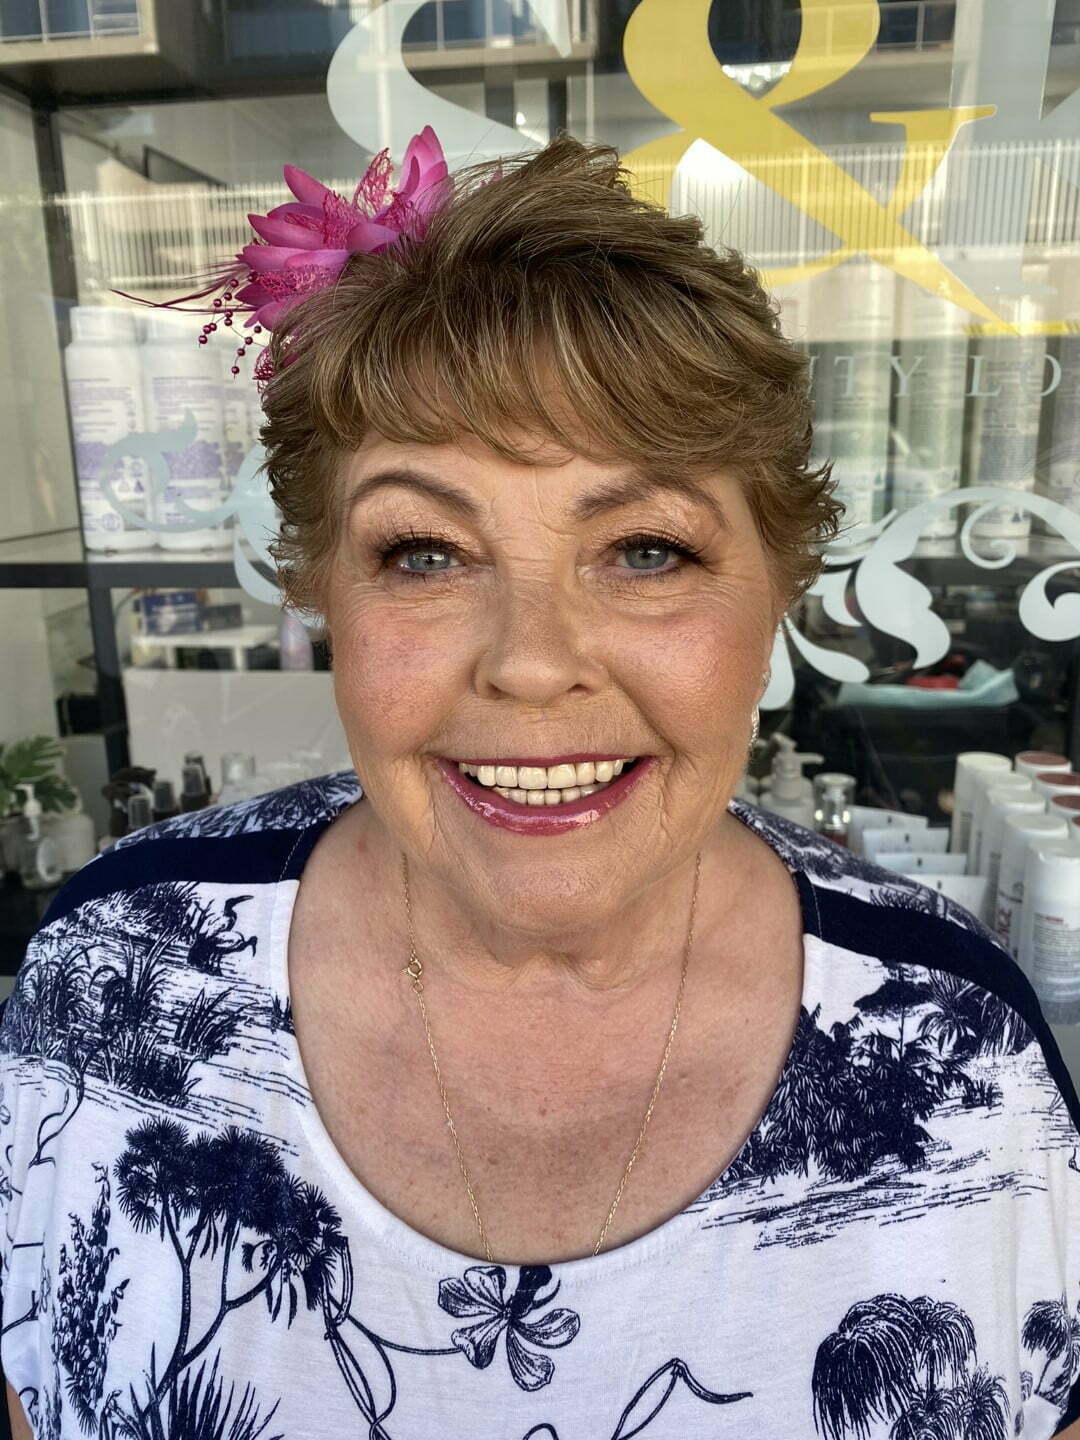 Granny Woman wearing make up with flower in her hair